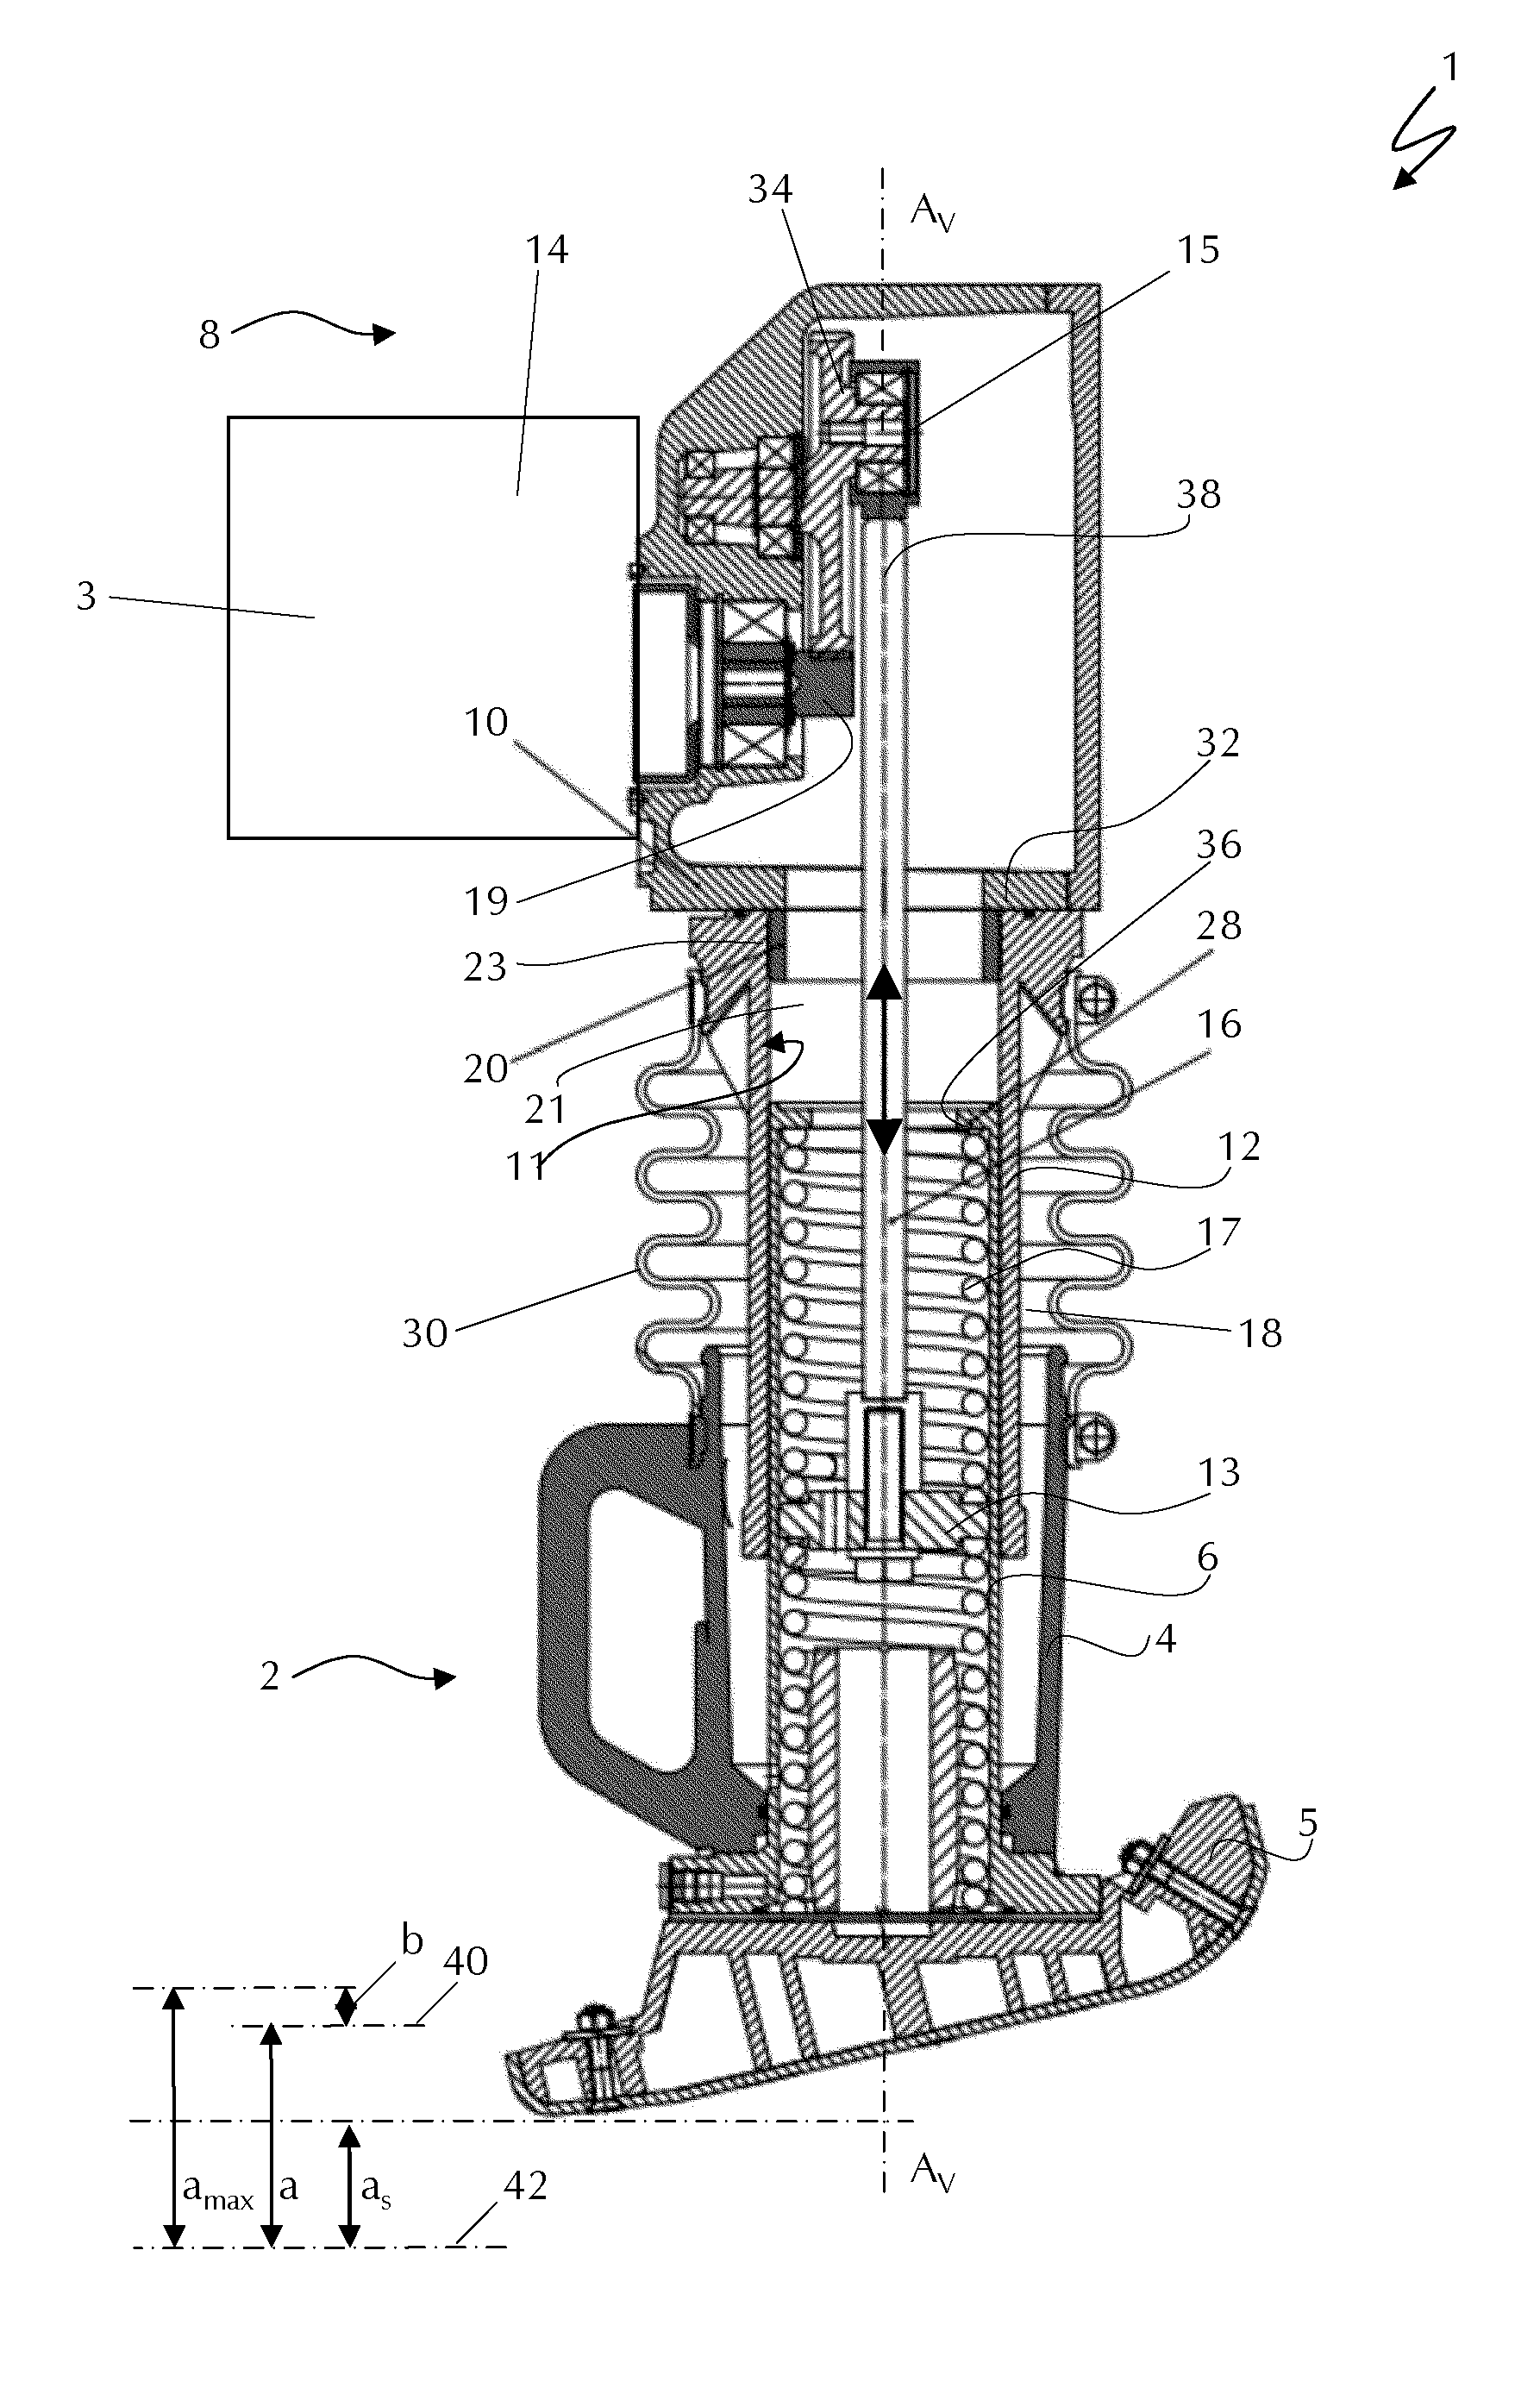 Apparatus for soil compaction